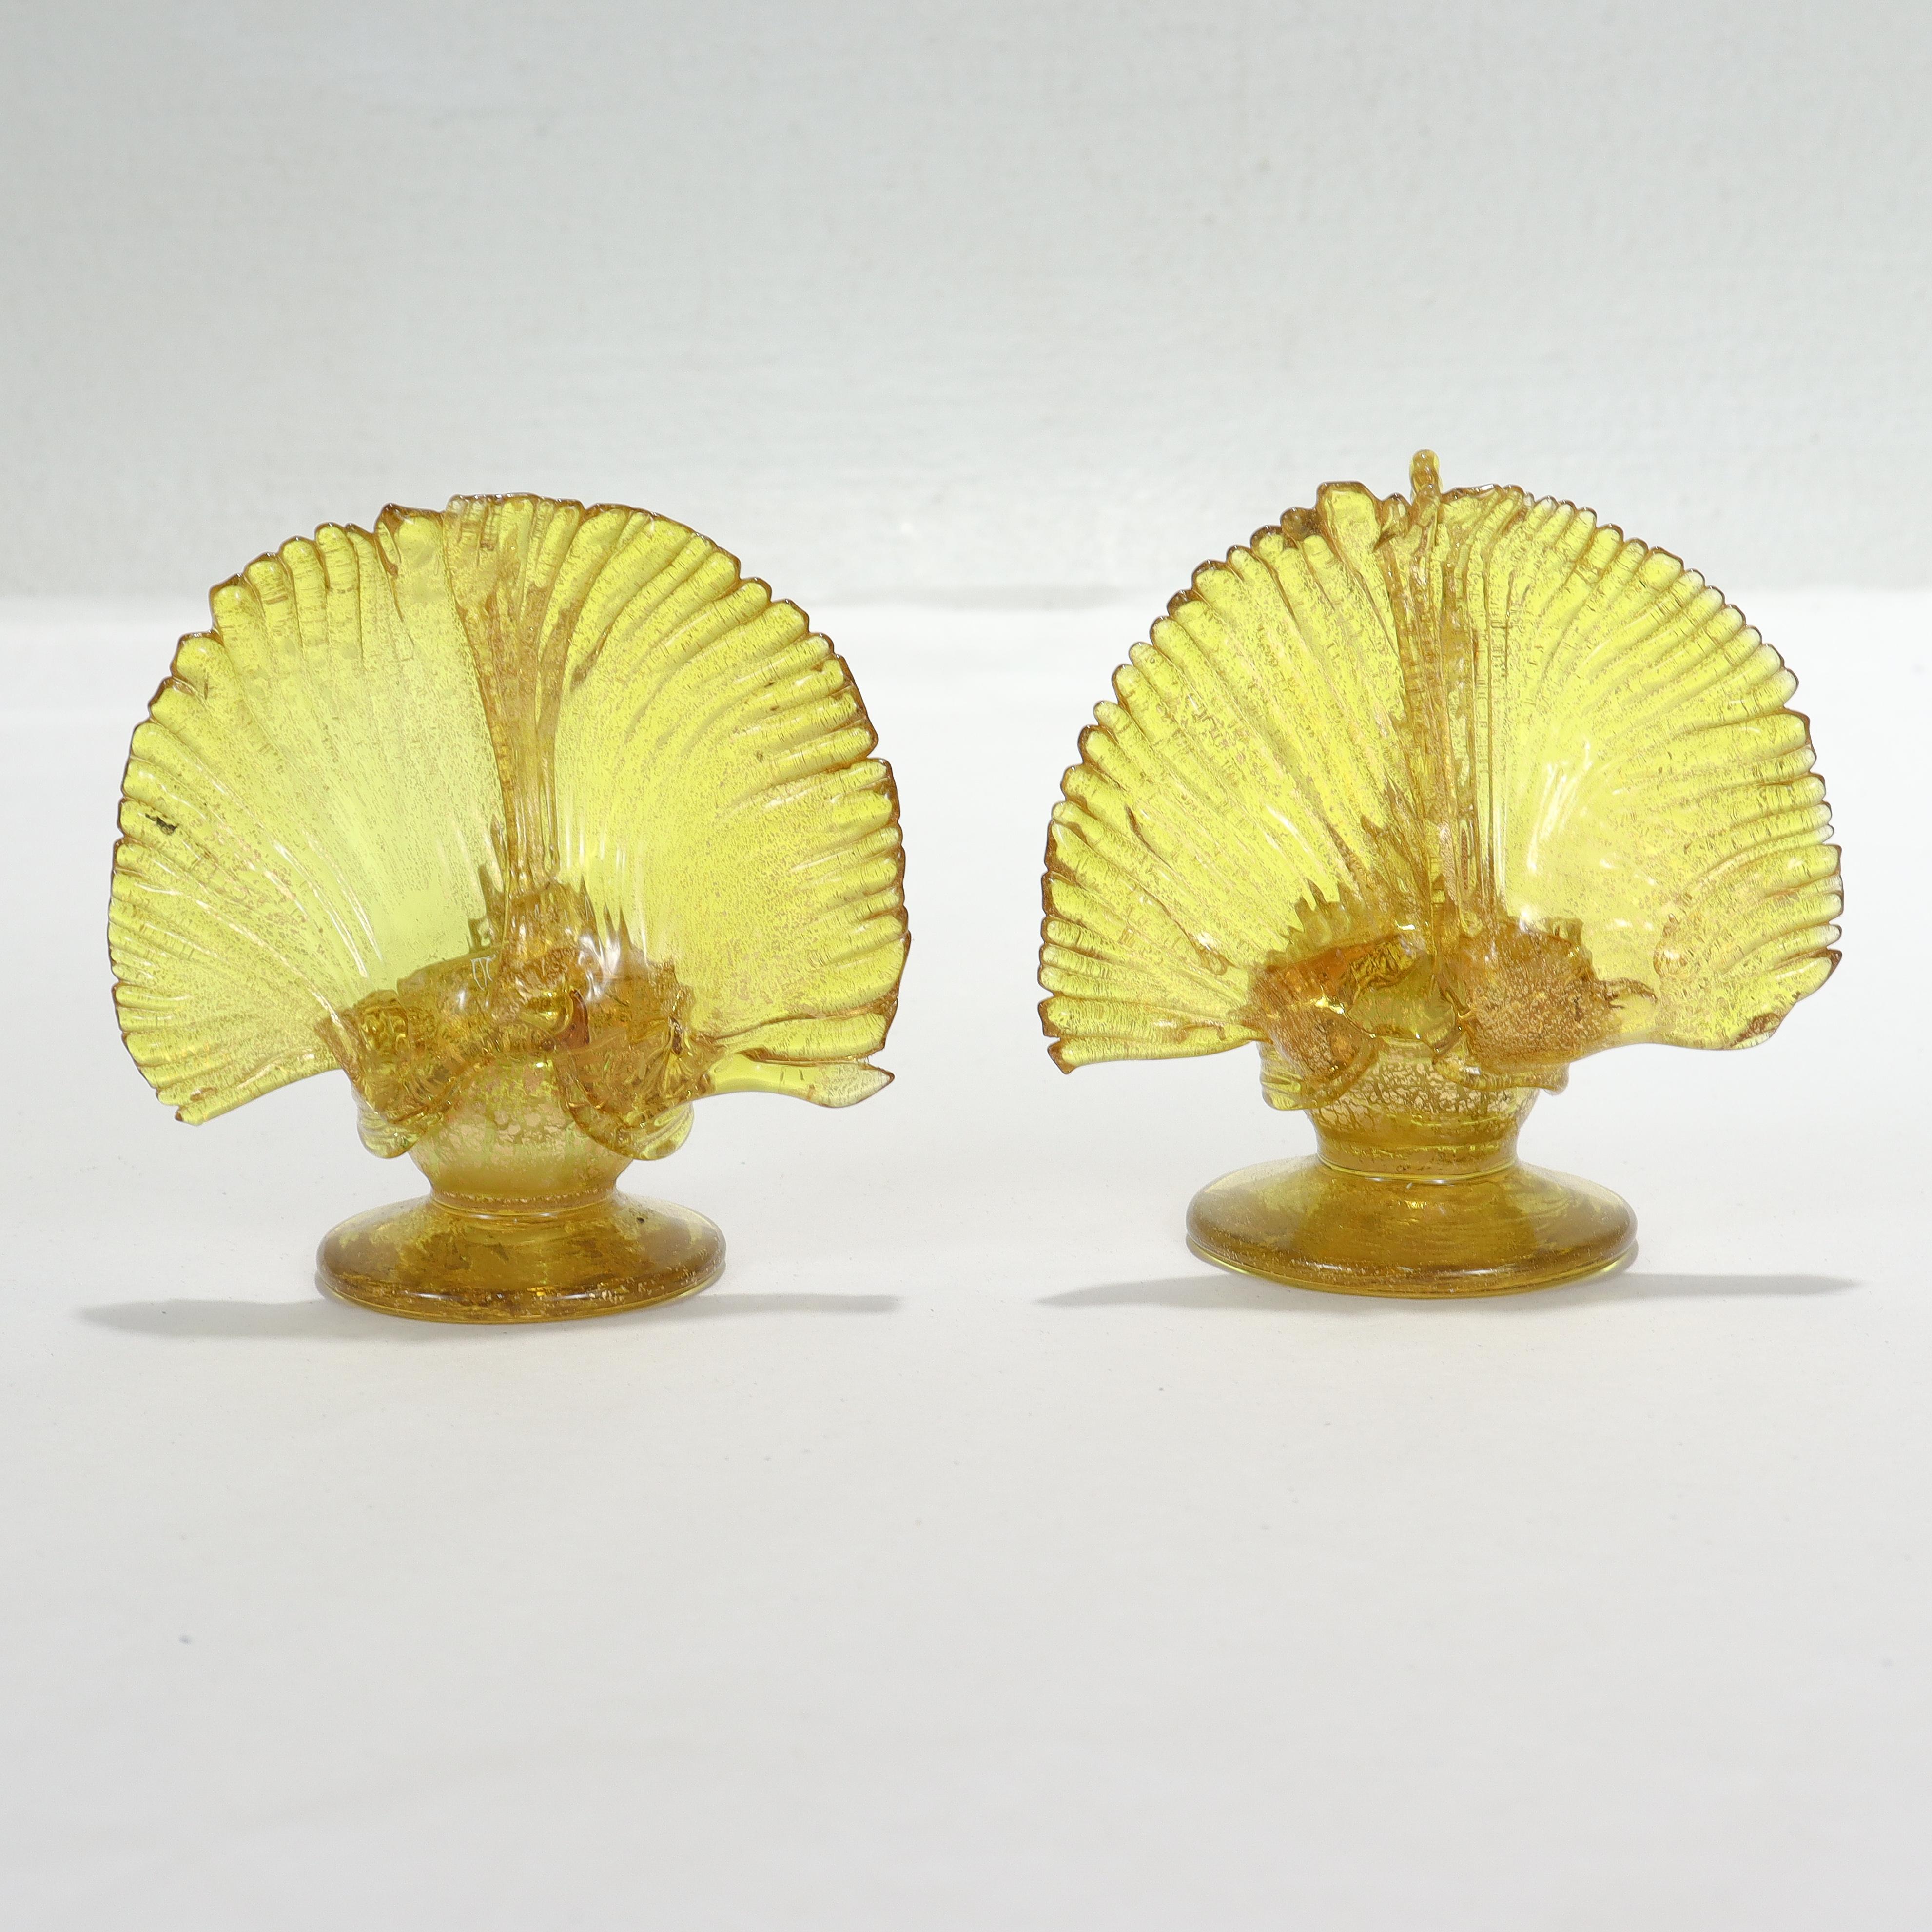 Pair Salviati Attributed Venetian/Murano Glass Peacock Place Card Holder Figures For Sale 1